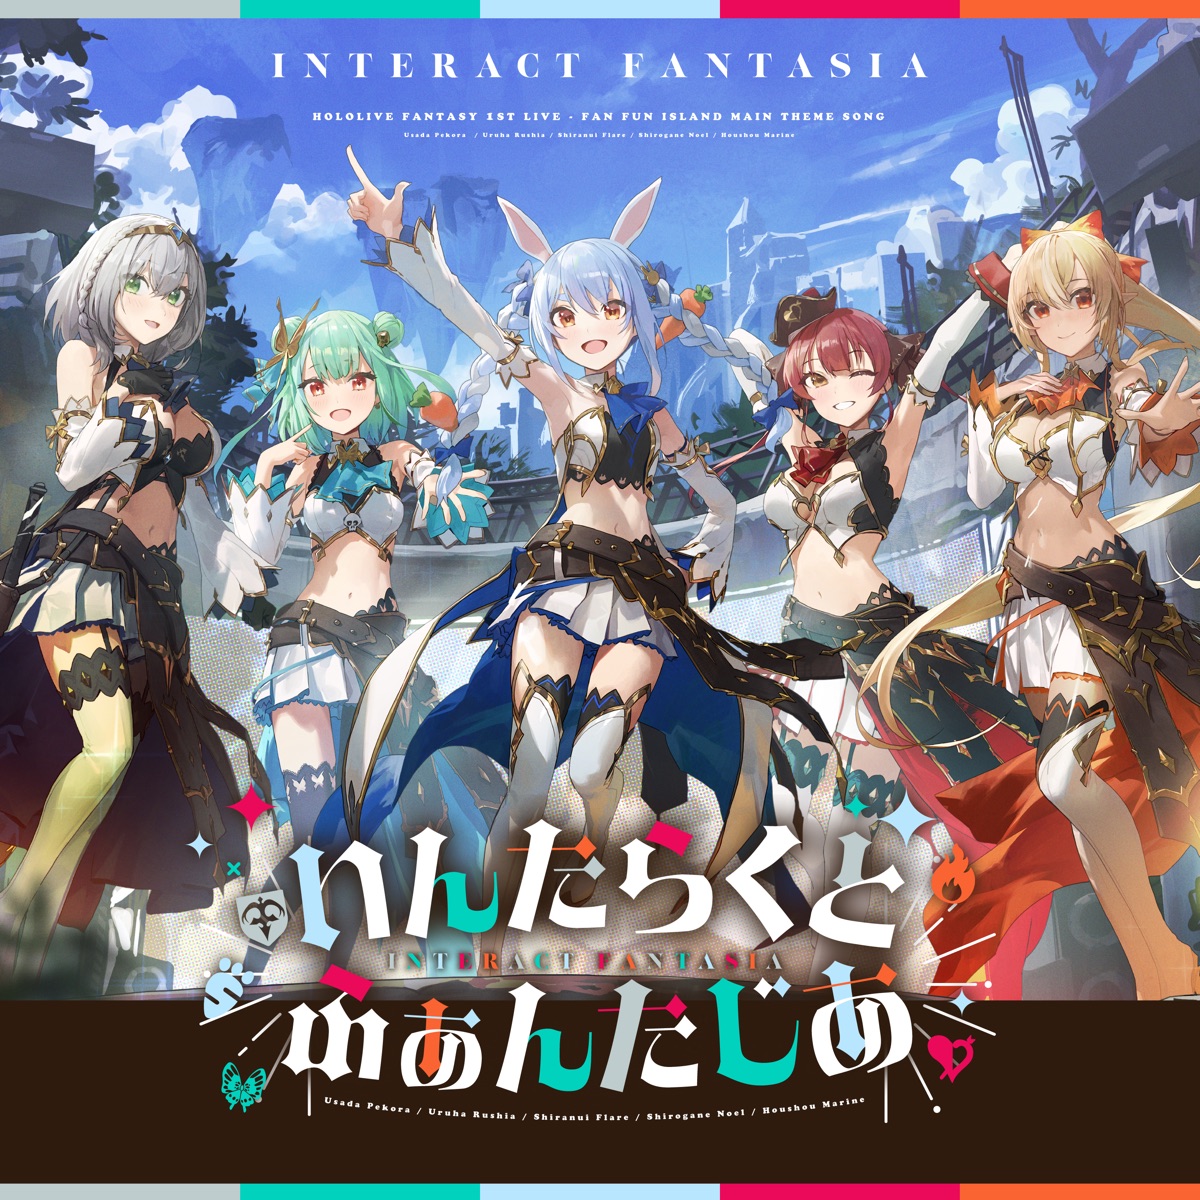 Cover art for『hololive Fantasy - いんたらくとふぁんたじあ』from the release『Interact Fantasia